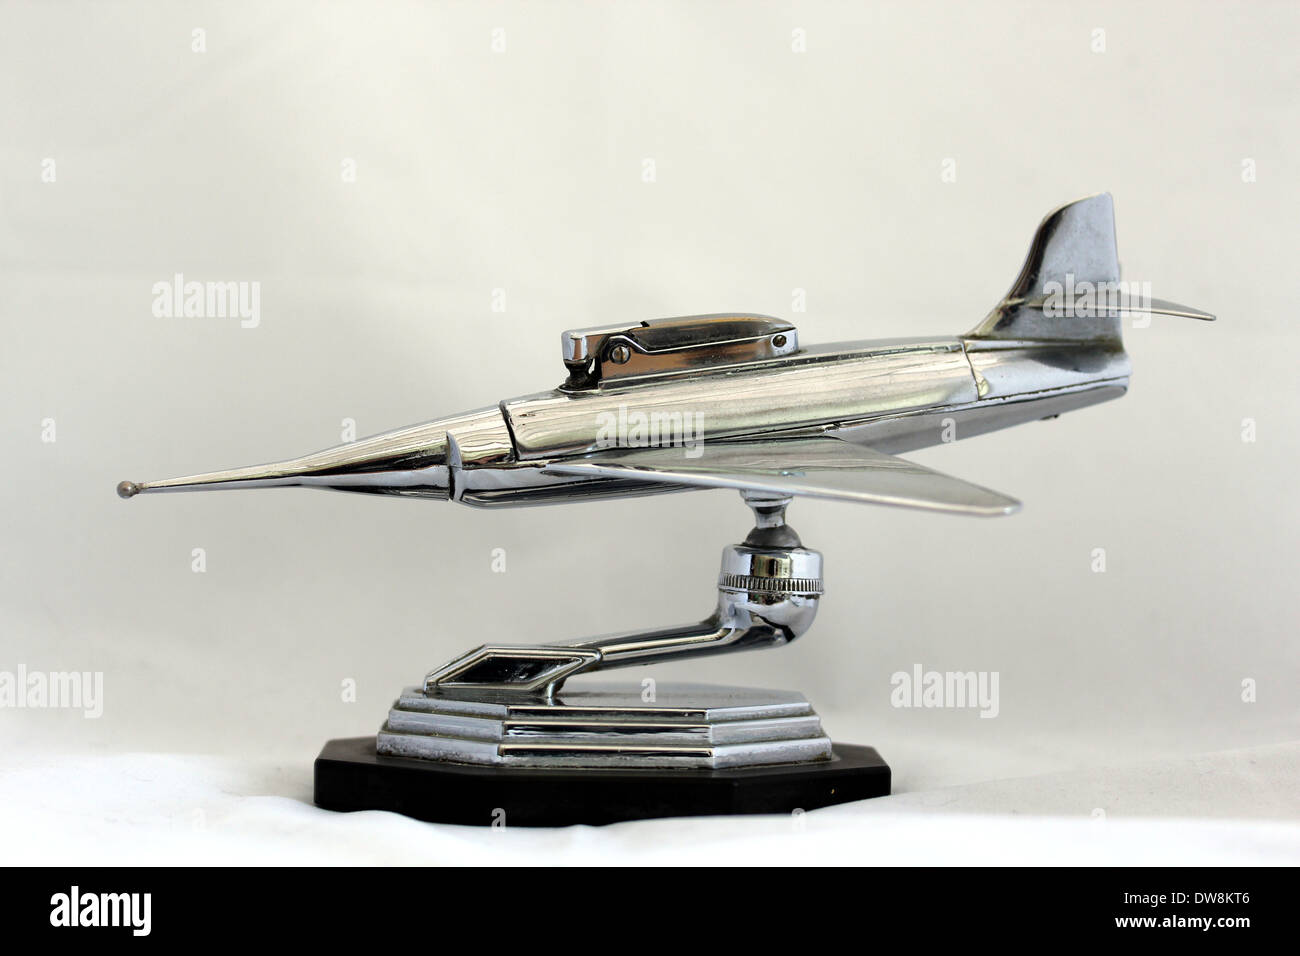 1950s jet airplane table cigarette lighter Stock Photo - Alamy